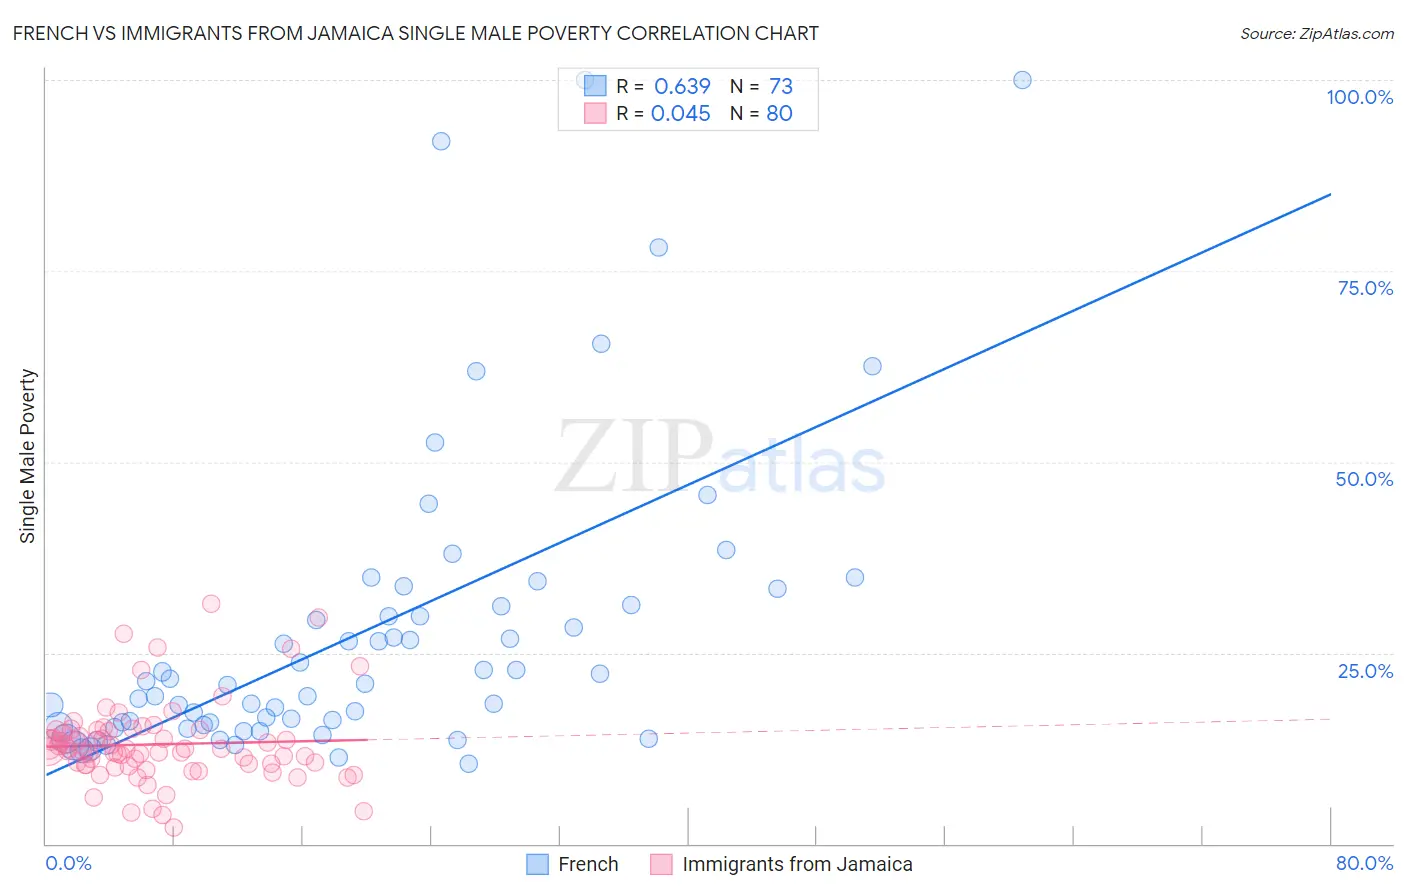 French vs Immigrants from Jamaica Single Male Poverty